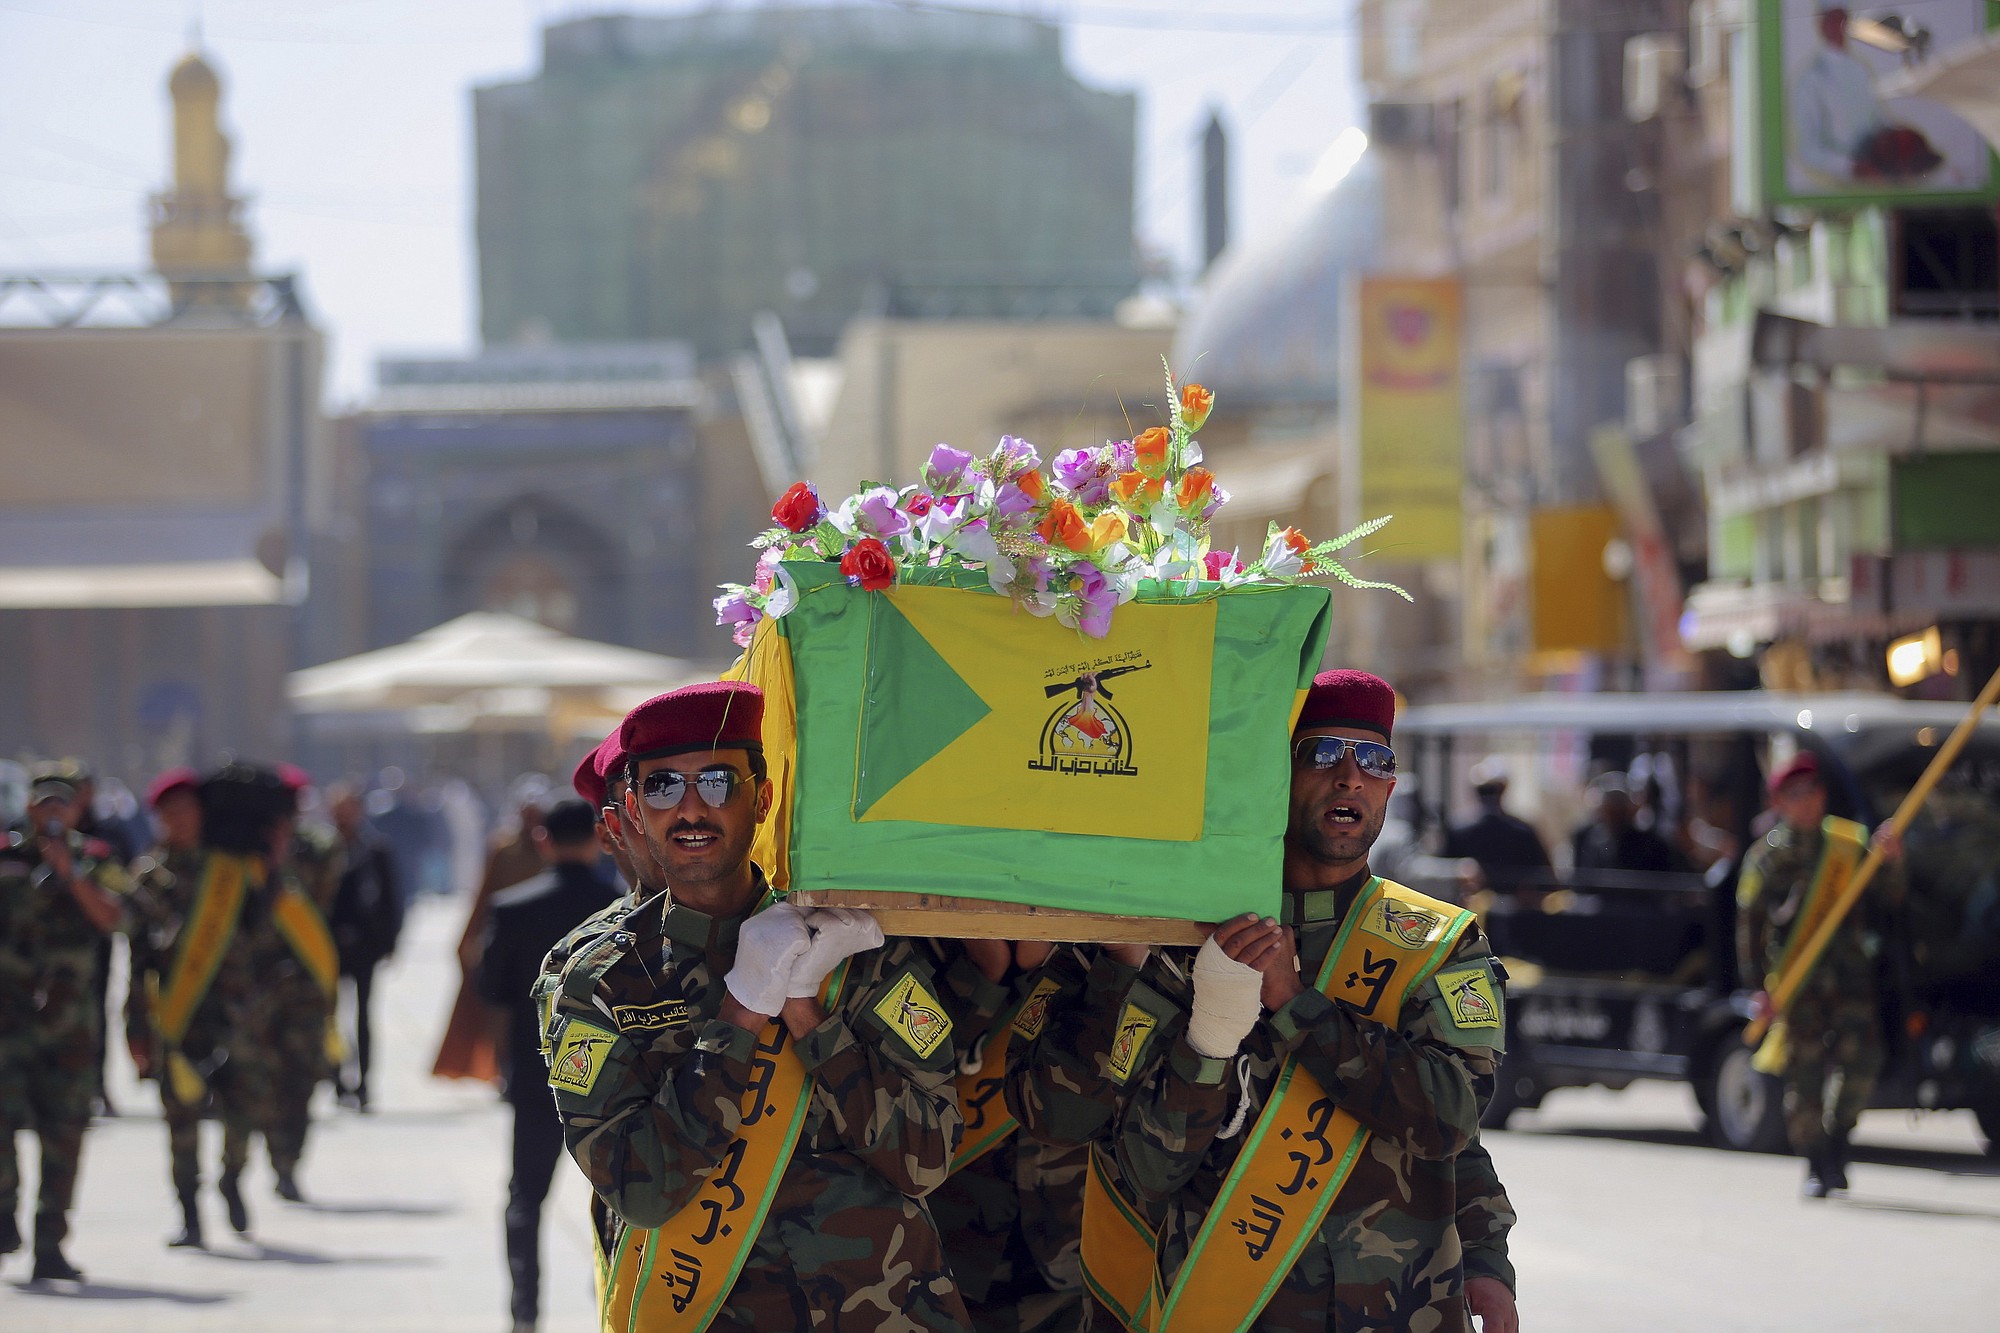 Iraqi Hezbollah fighters carry the coffin of their comrade, Ali Mansour, who his family says was killed in Tikrit fighting Islamic militants, during his funeral procession, in the Shiite holy city of Najaf, 100 miles south of Baghdad, Iraq, on Monday.